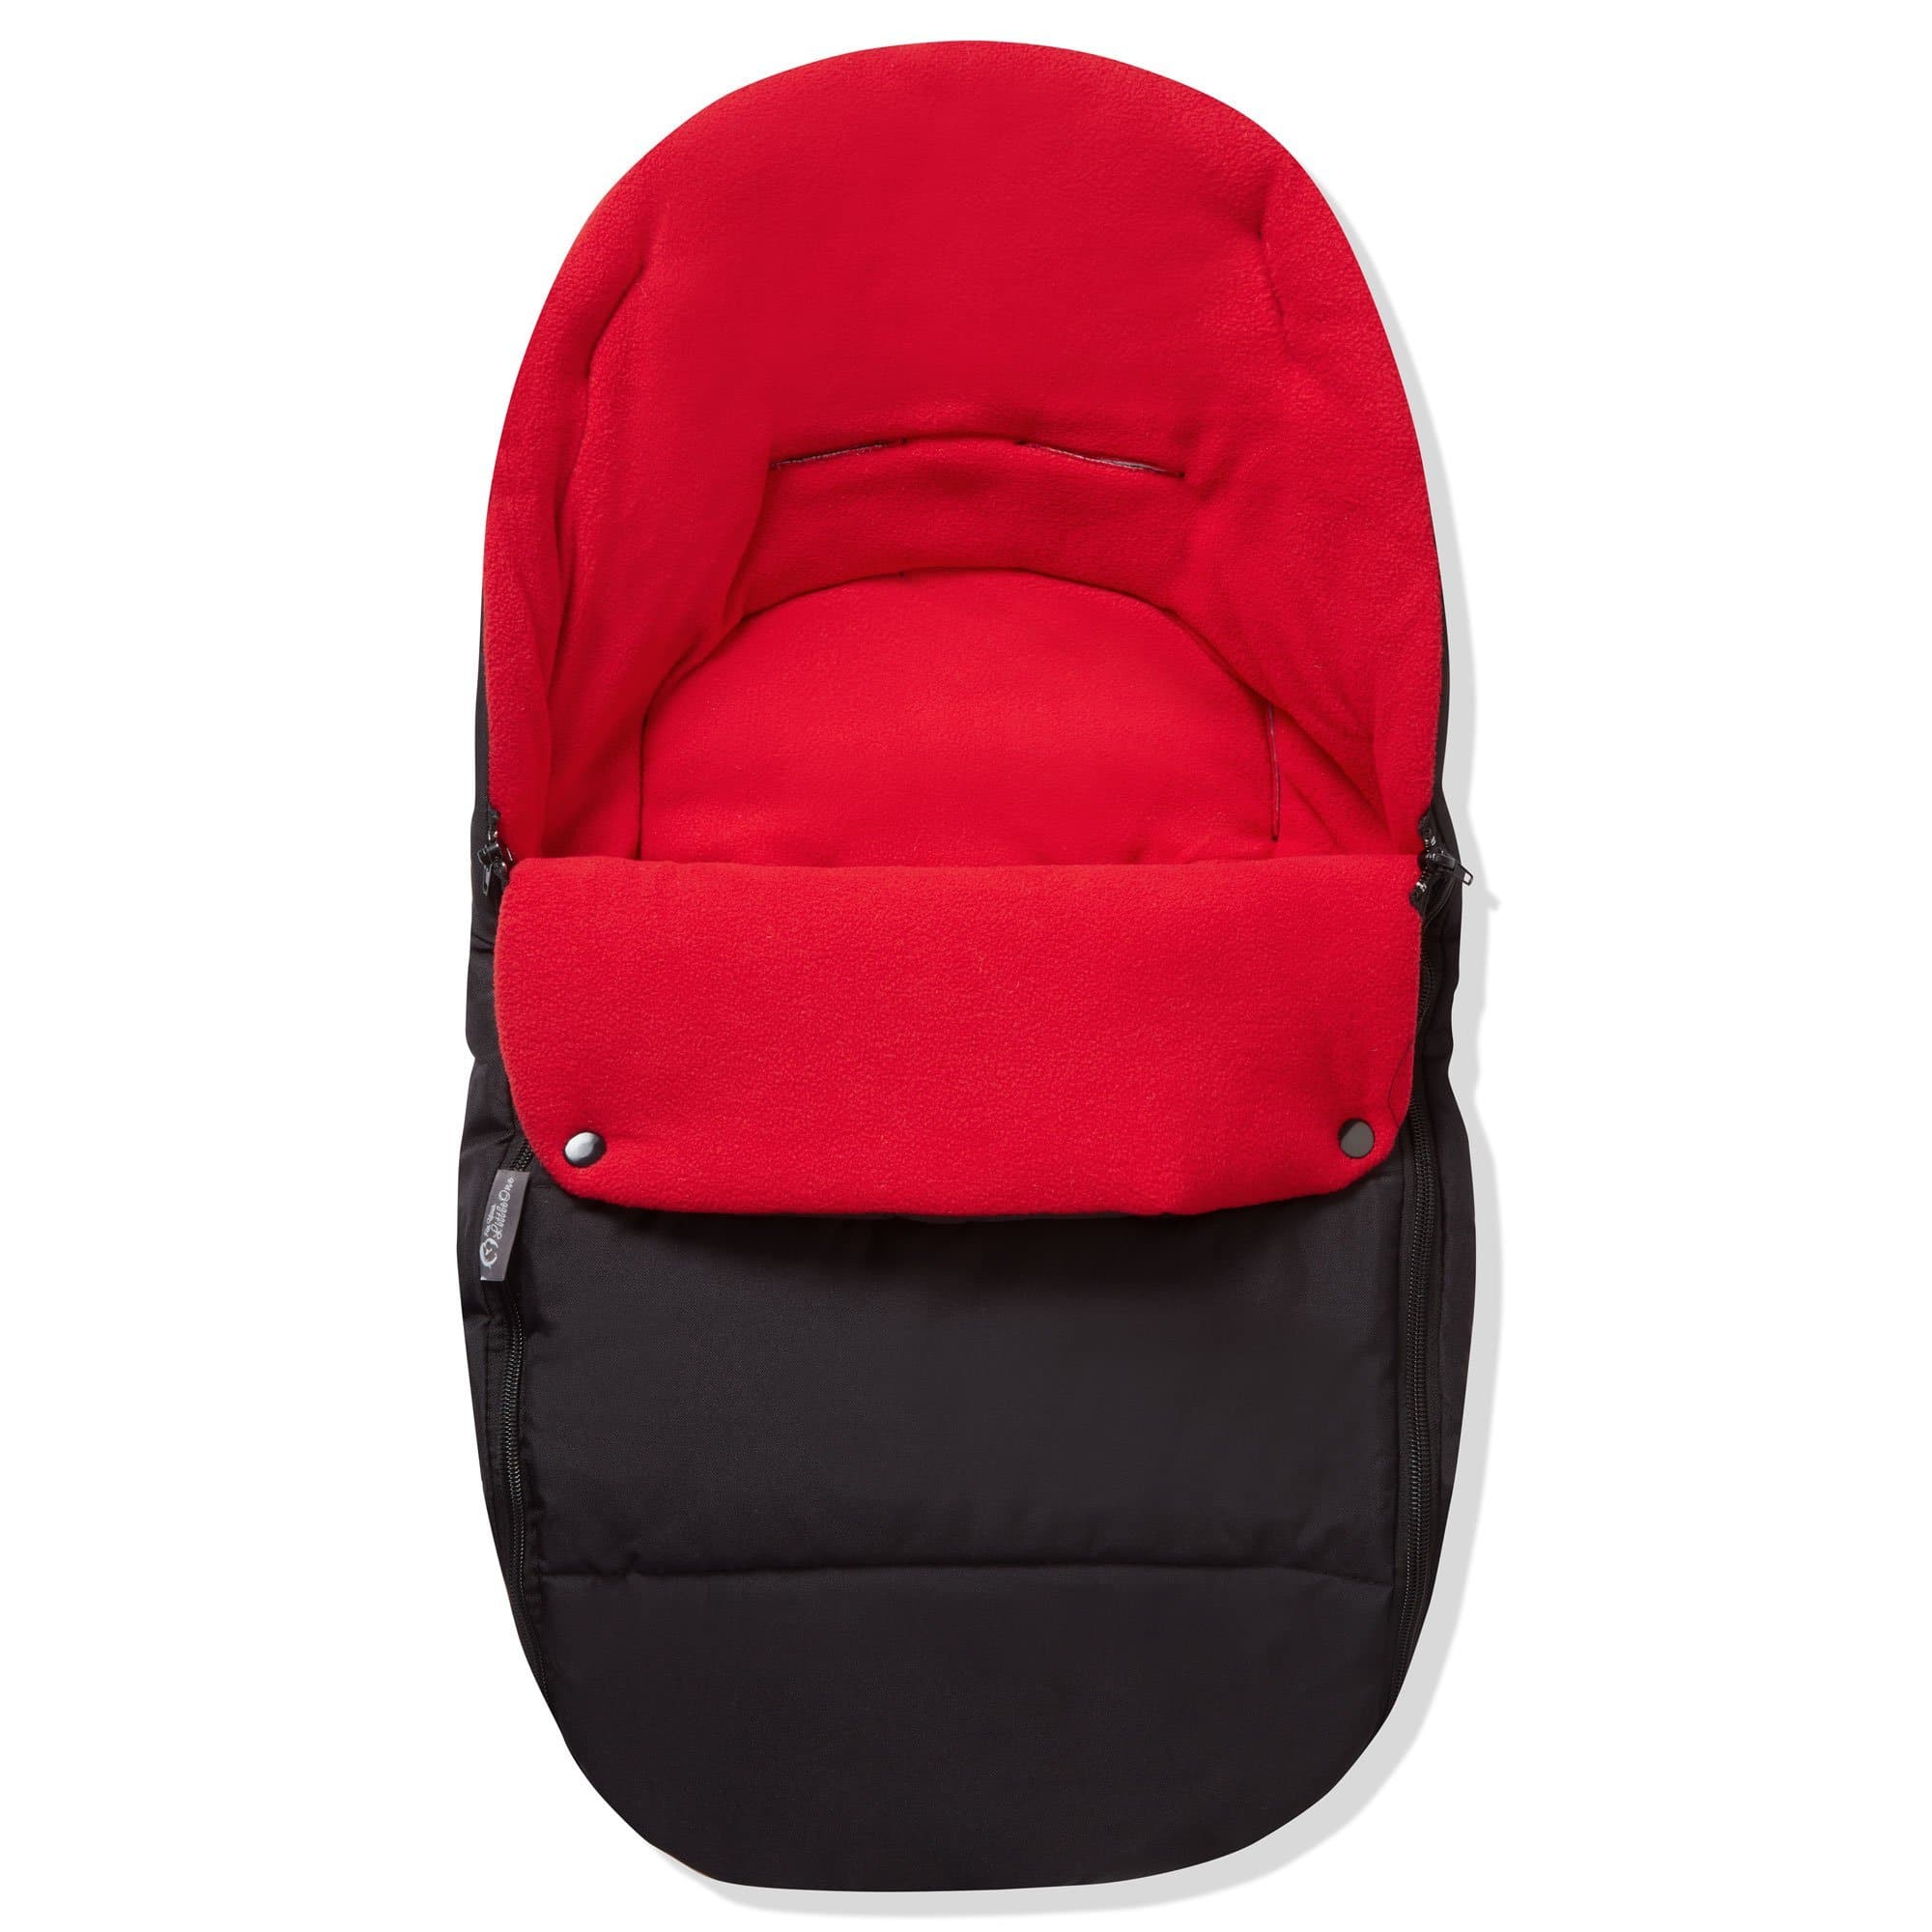 Premium Car Seat Footmuff / Cosy Toes Compatible with Phil & Teds - Fire Red / Fits All Models | For Your Little One